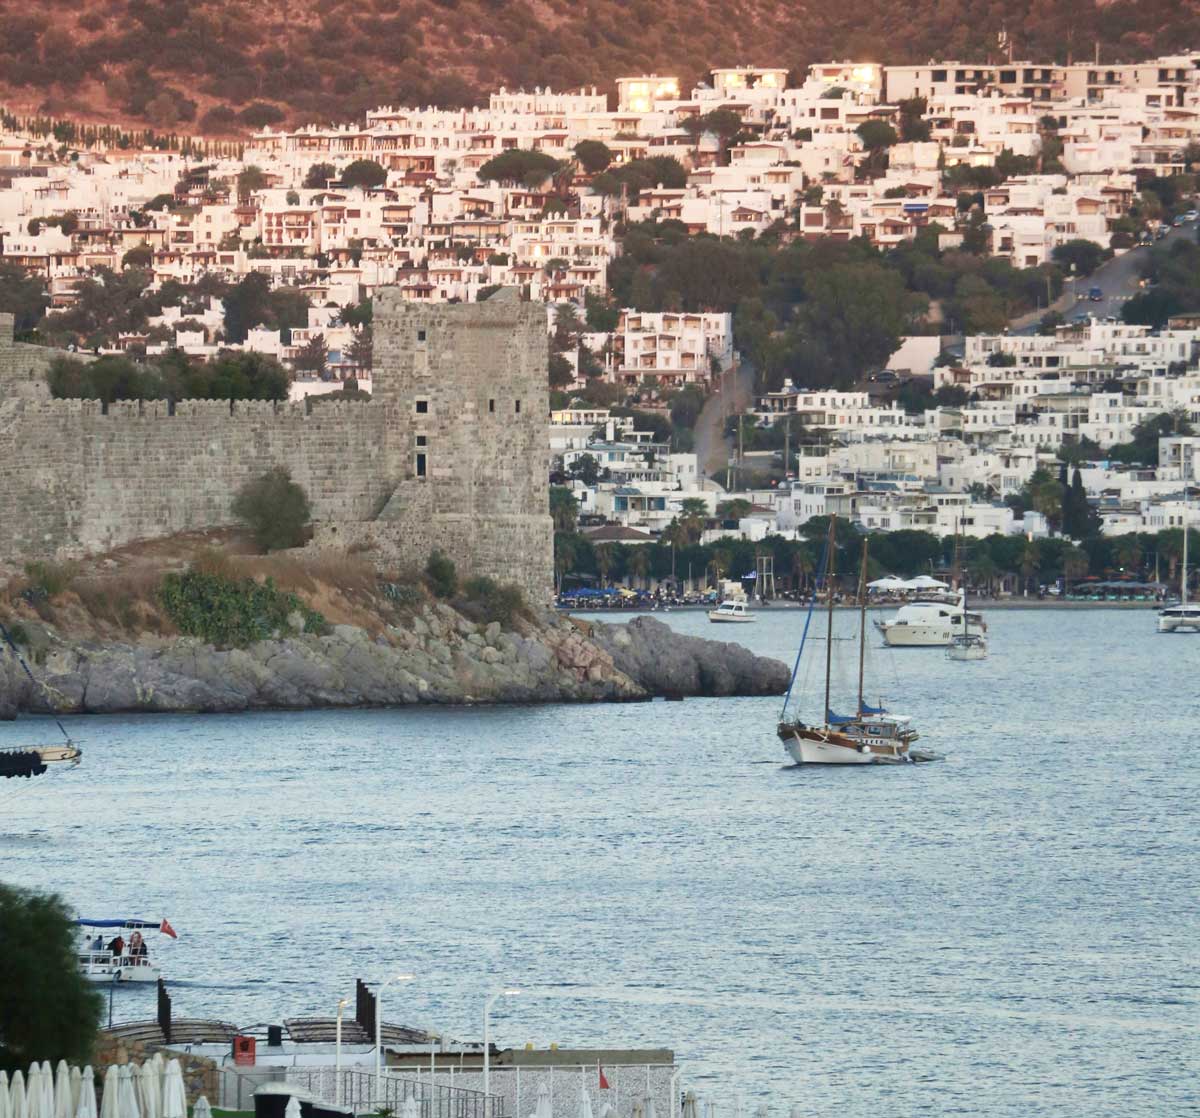 A view of Bodrum castle